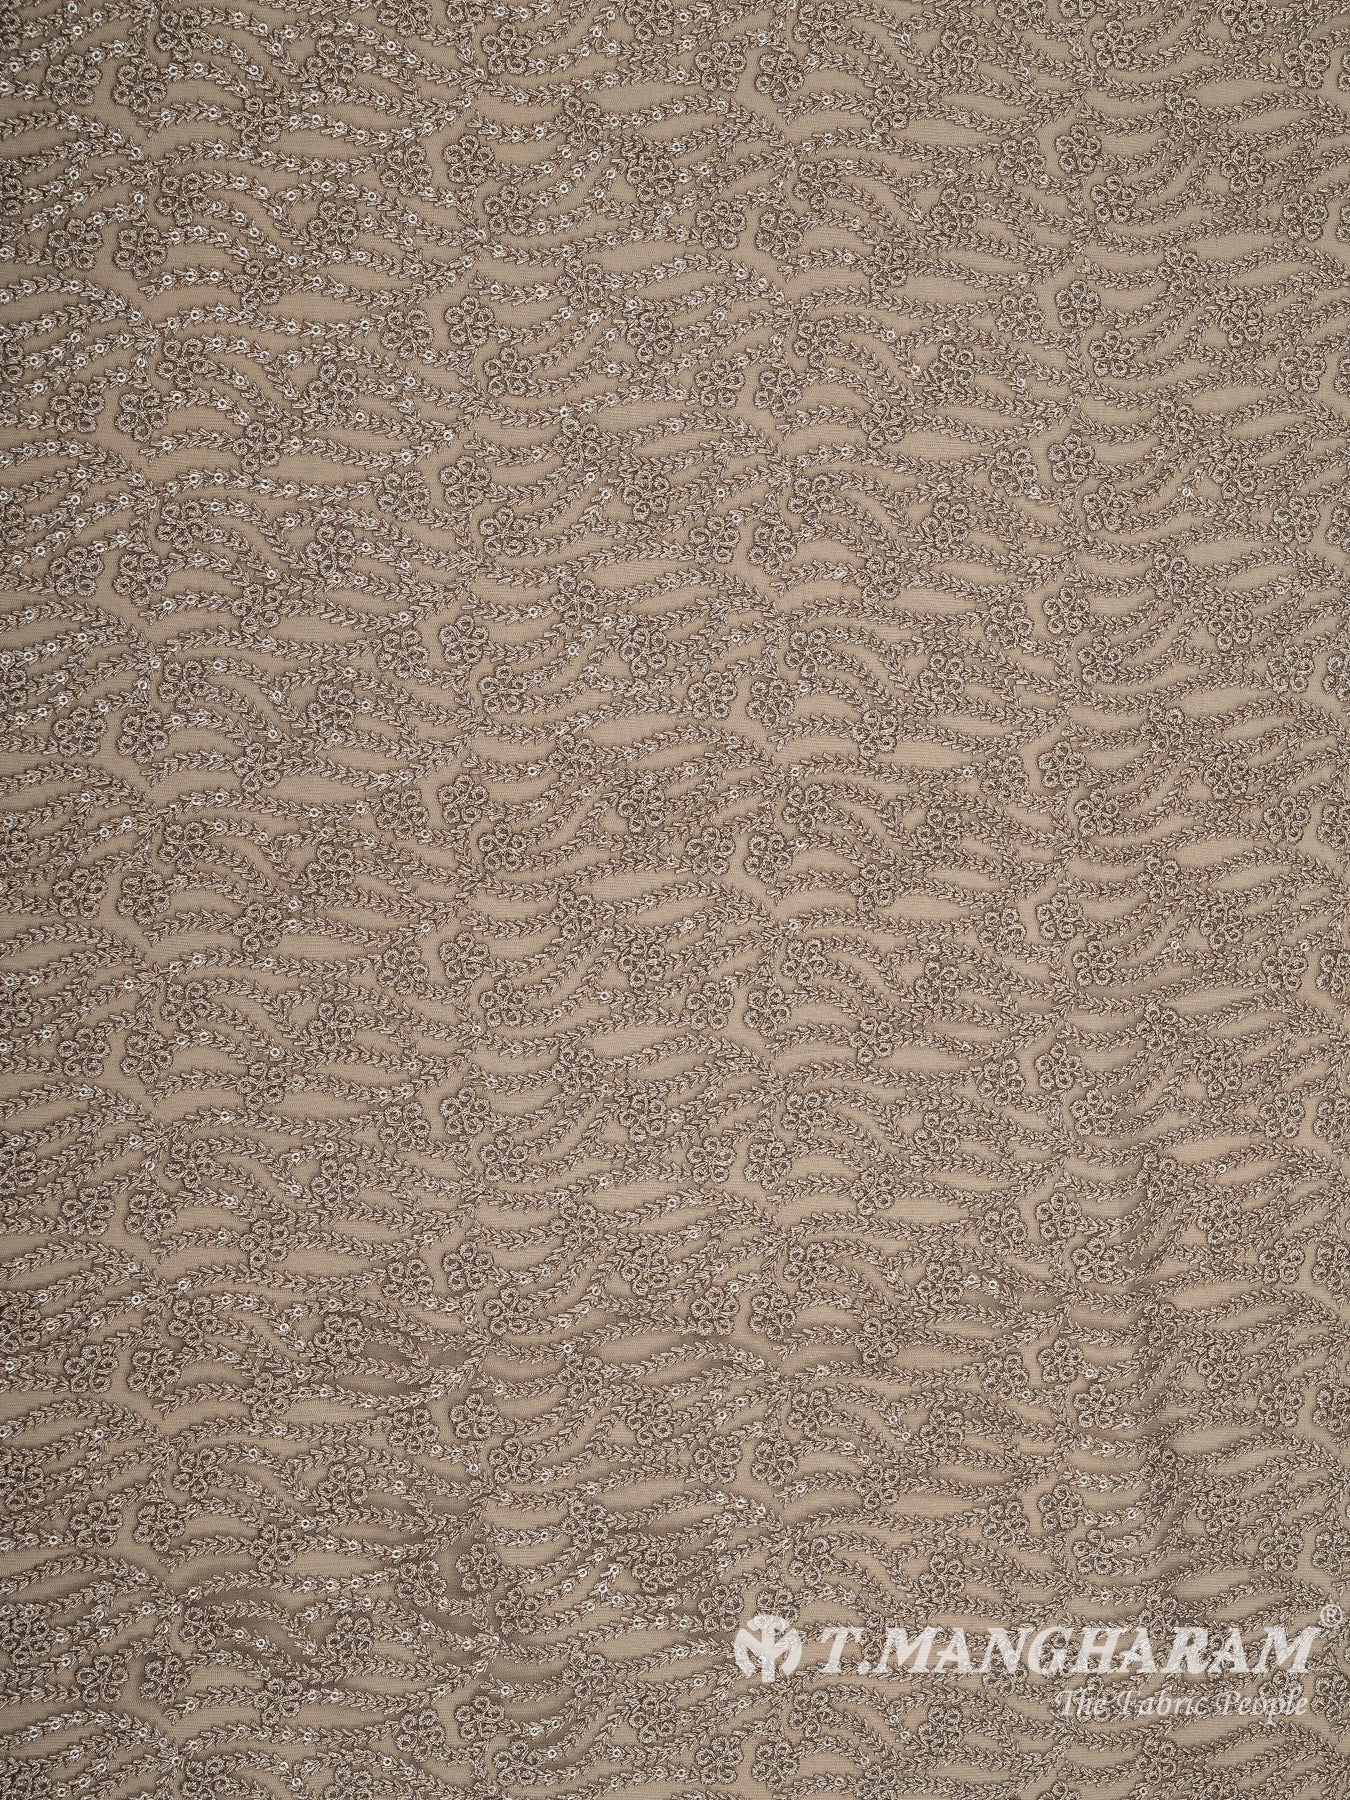 Beige Net Embroidery Fabric - EC8429 view-3